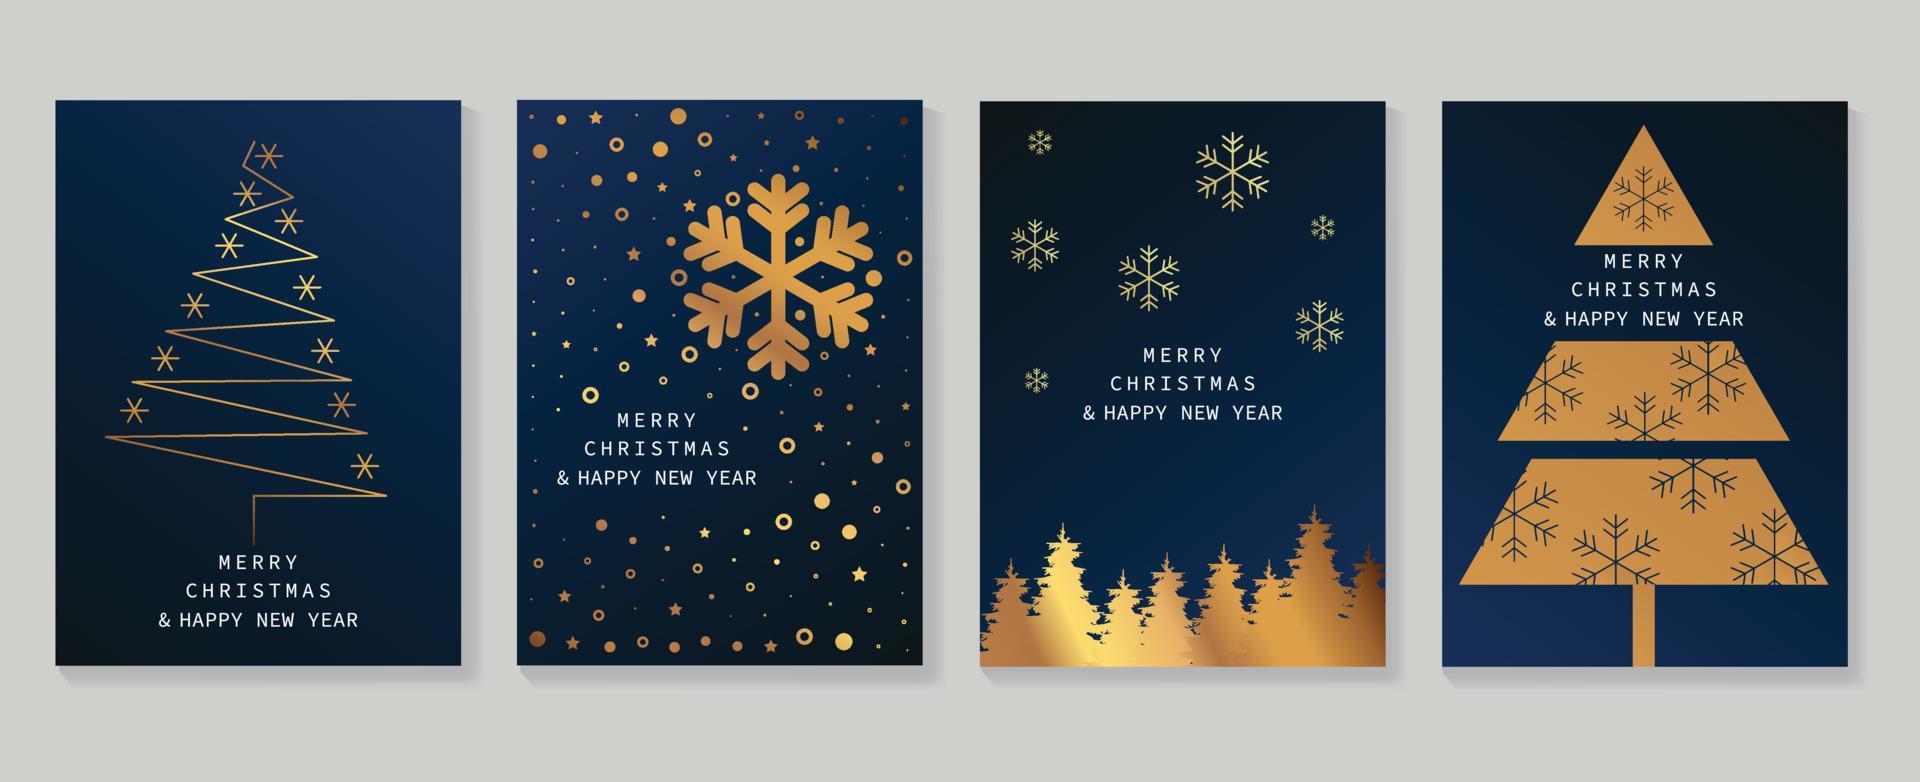 Luxury christmas and happy new year holiday cover template vector set. Decorated gradient gold christmas tree with snowflakes. Design illustration for card, corporate, greeting, wallpaper, poster.